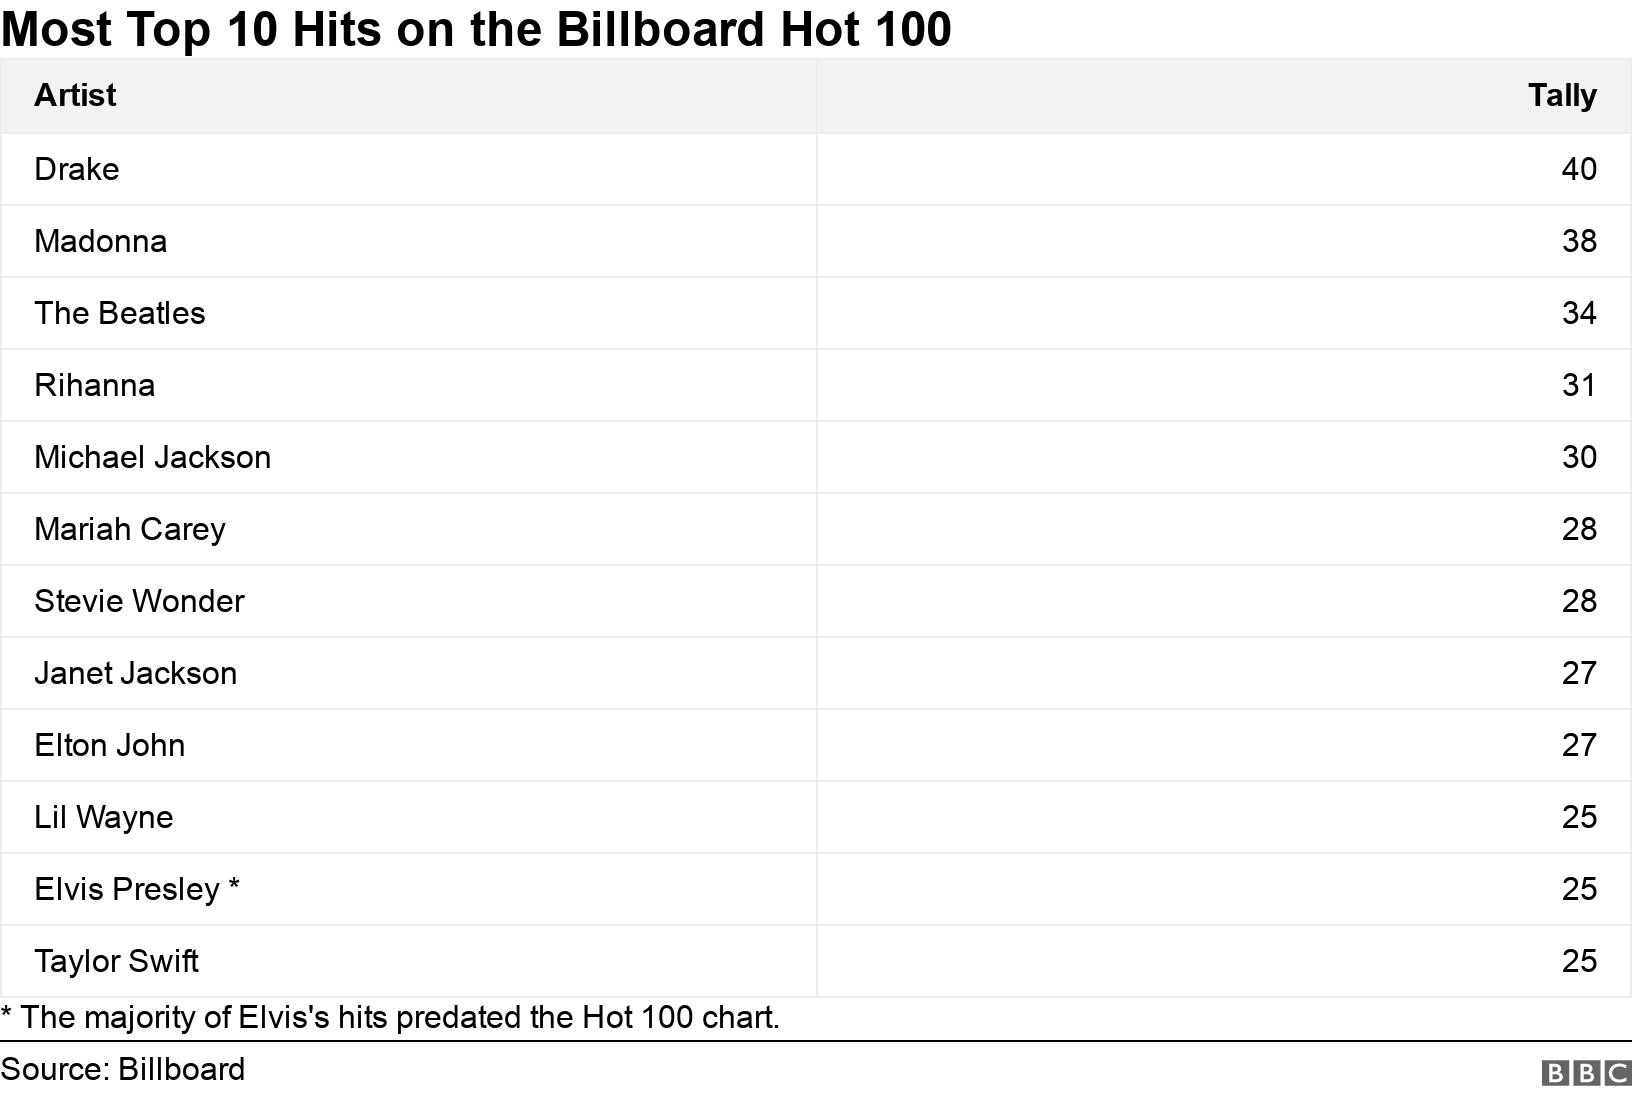 sector Movement Europe Drake overtakes Madonna and The Beatles to break US Billboard chart record  - BBC News